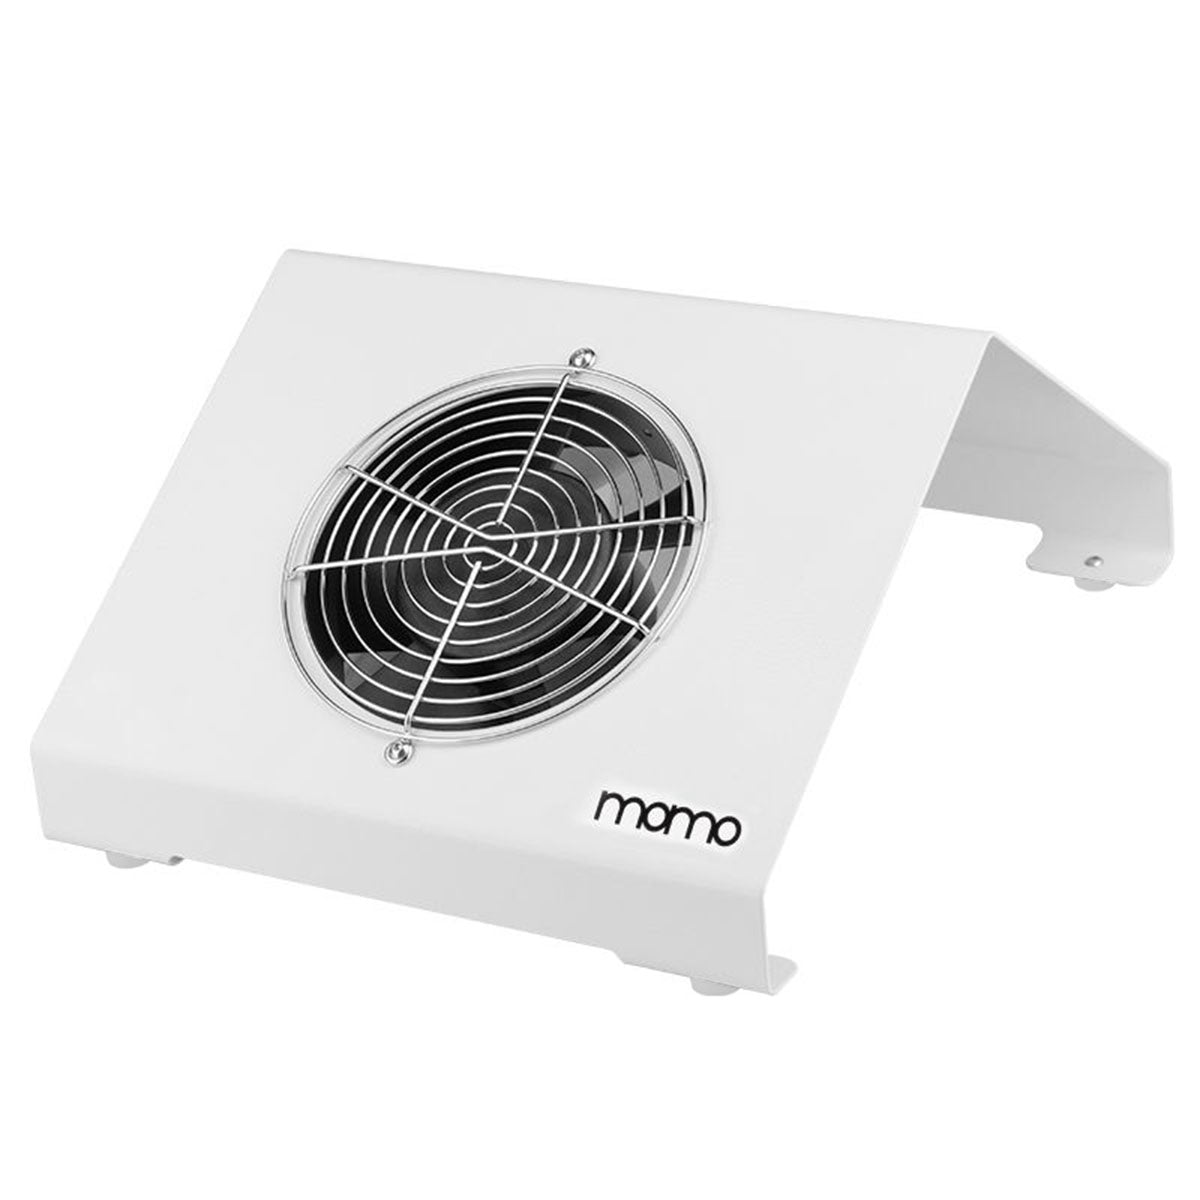 Dust absorber momo x2s 65w professional white